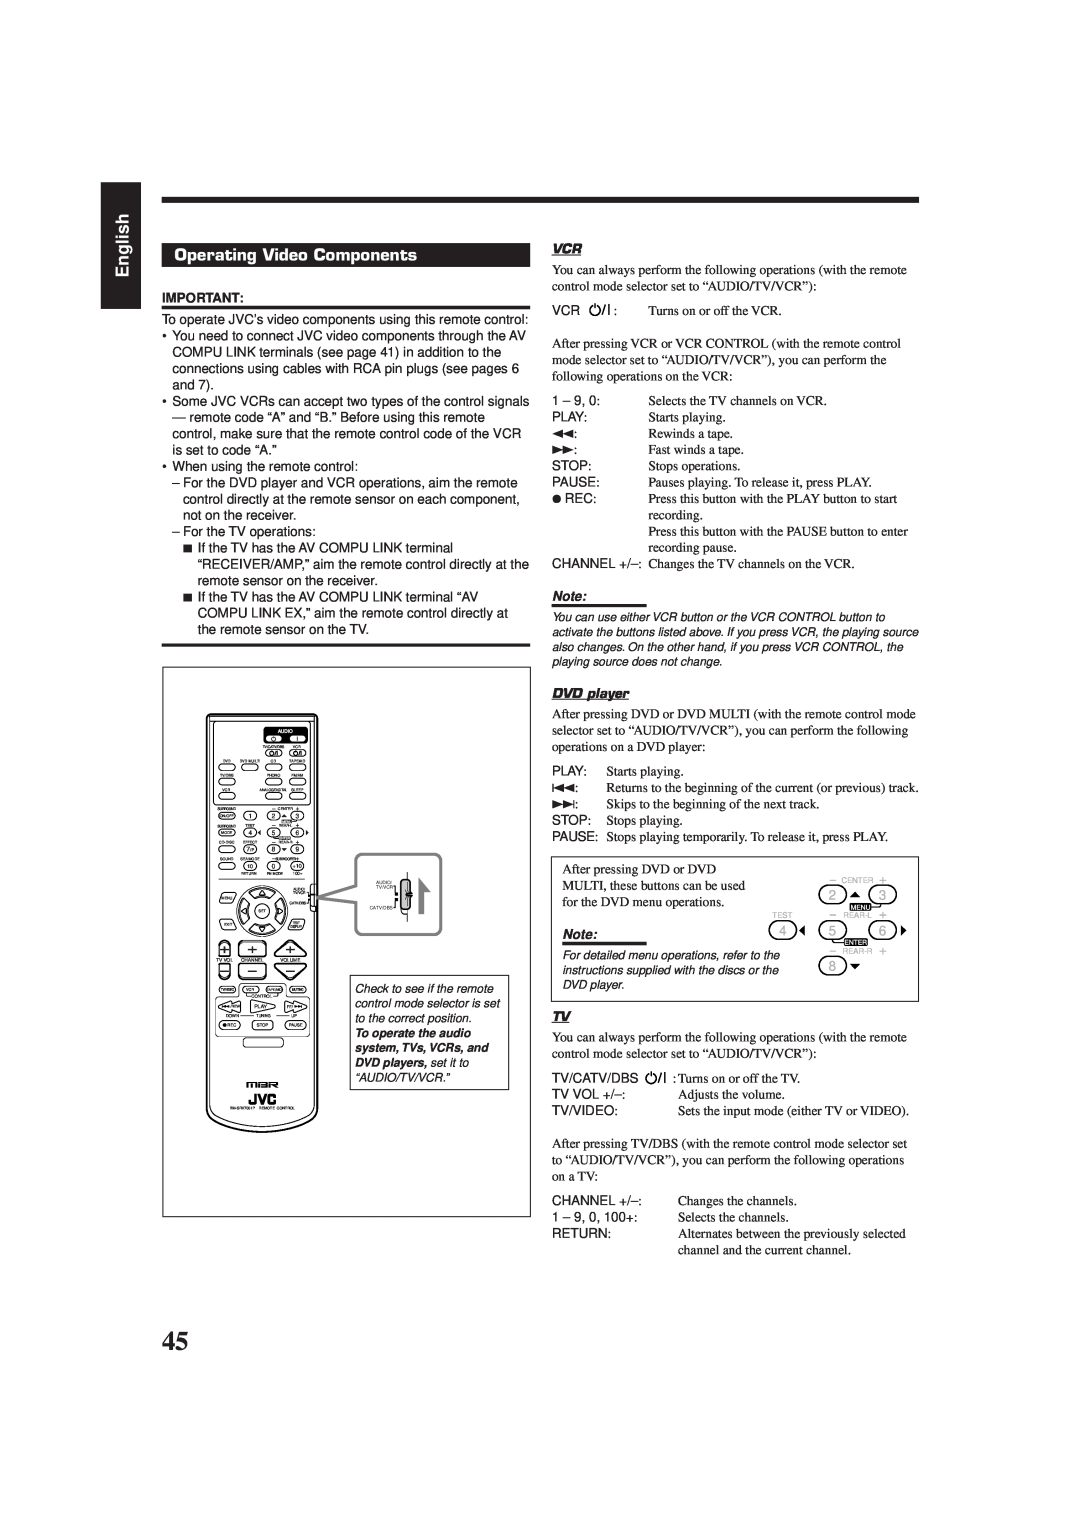 JVC RX-7001PGD manual English, Operating Video Components, DVD player, for the DVD menu operations 